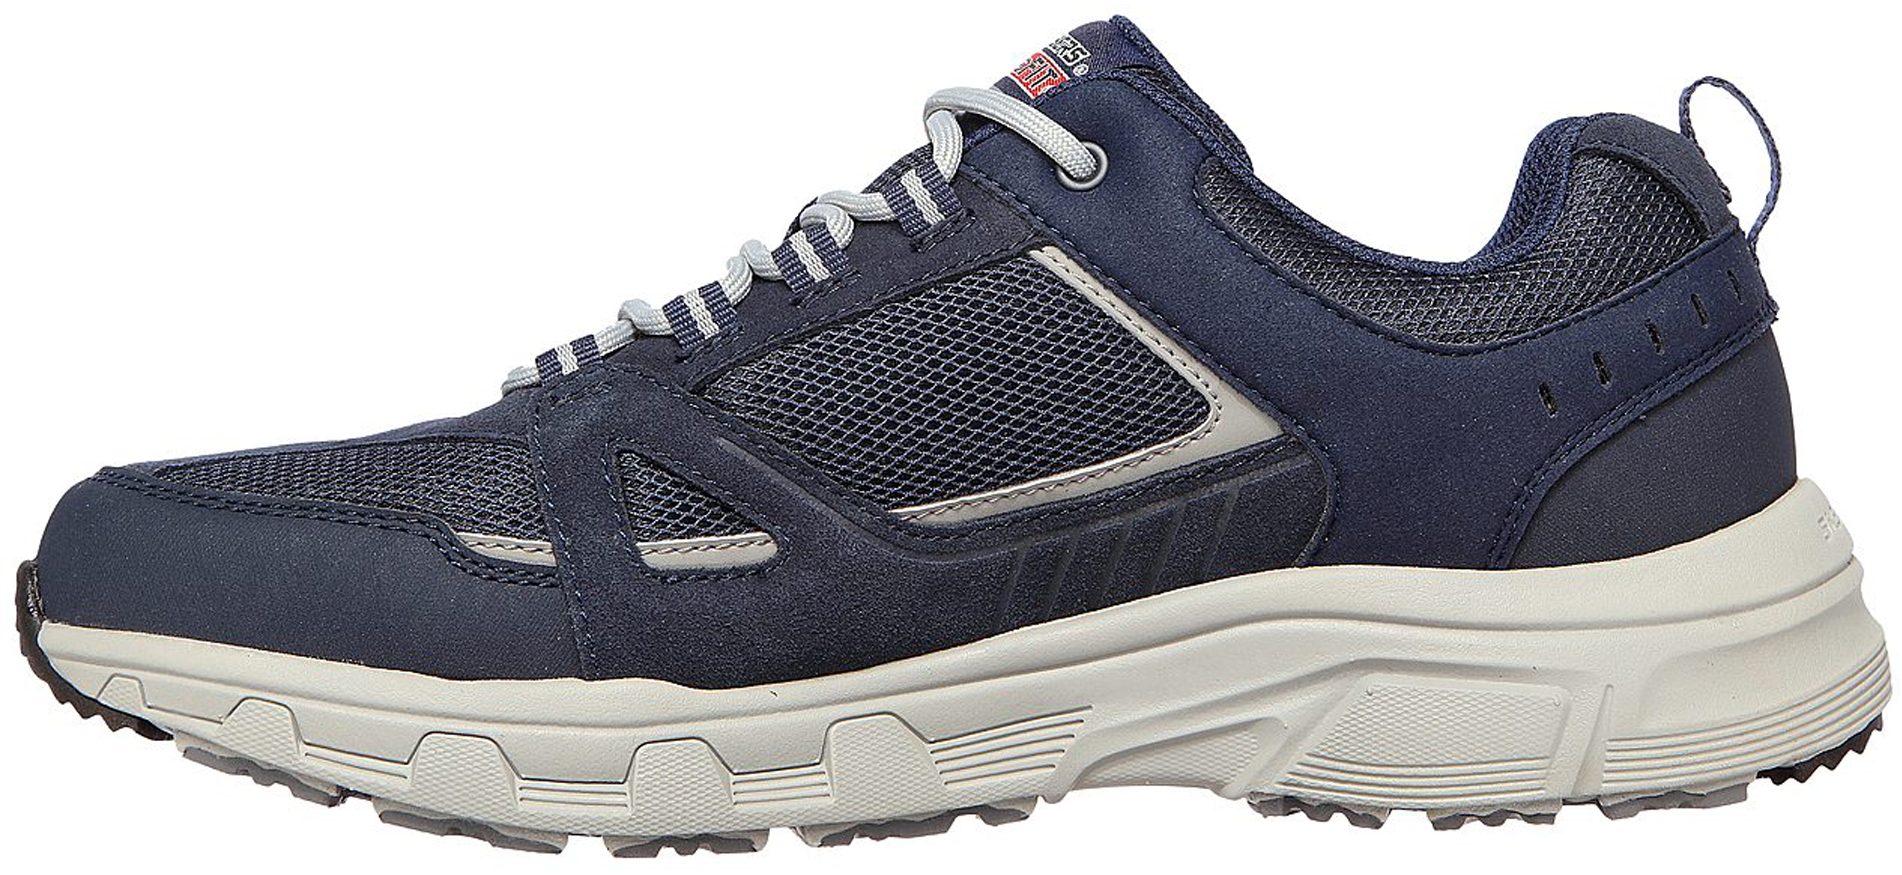 Skechers Relaxed Fit: Oak Canyon - Duelist Navy 237285 NVY - Casual ...